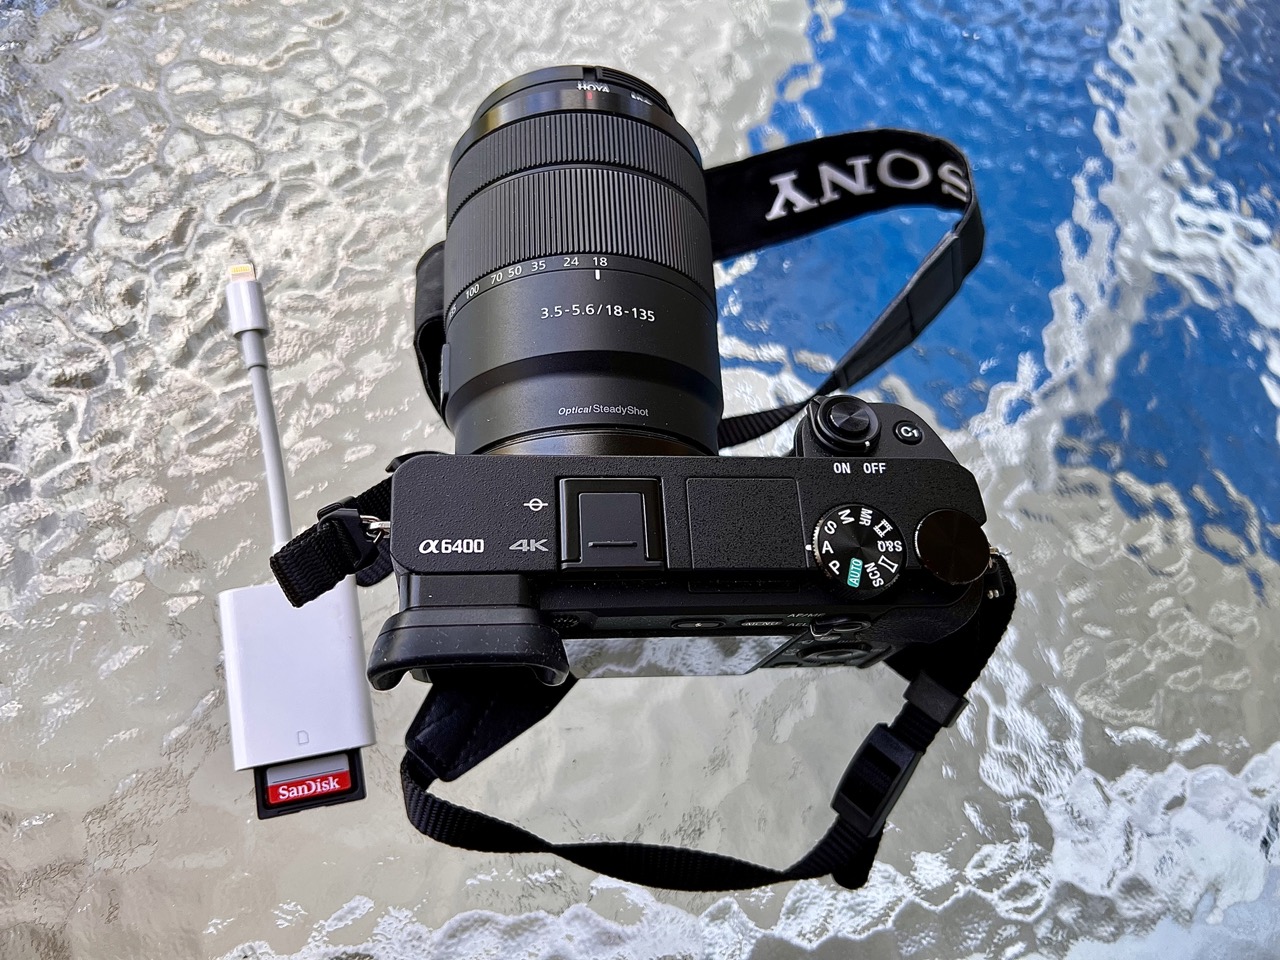 A photo of a Sony a6400 camera, and an Apple SD card reader, on top of one of those ugly rippled-glass patio tables.